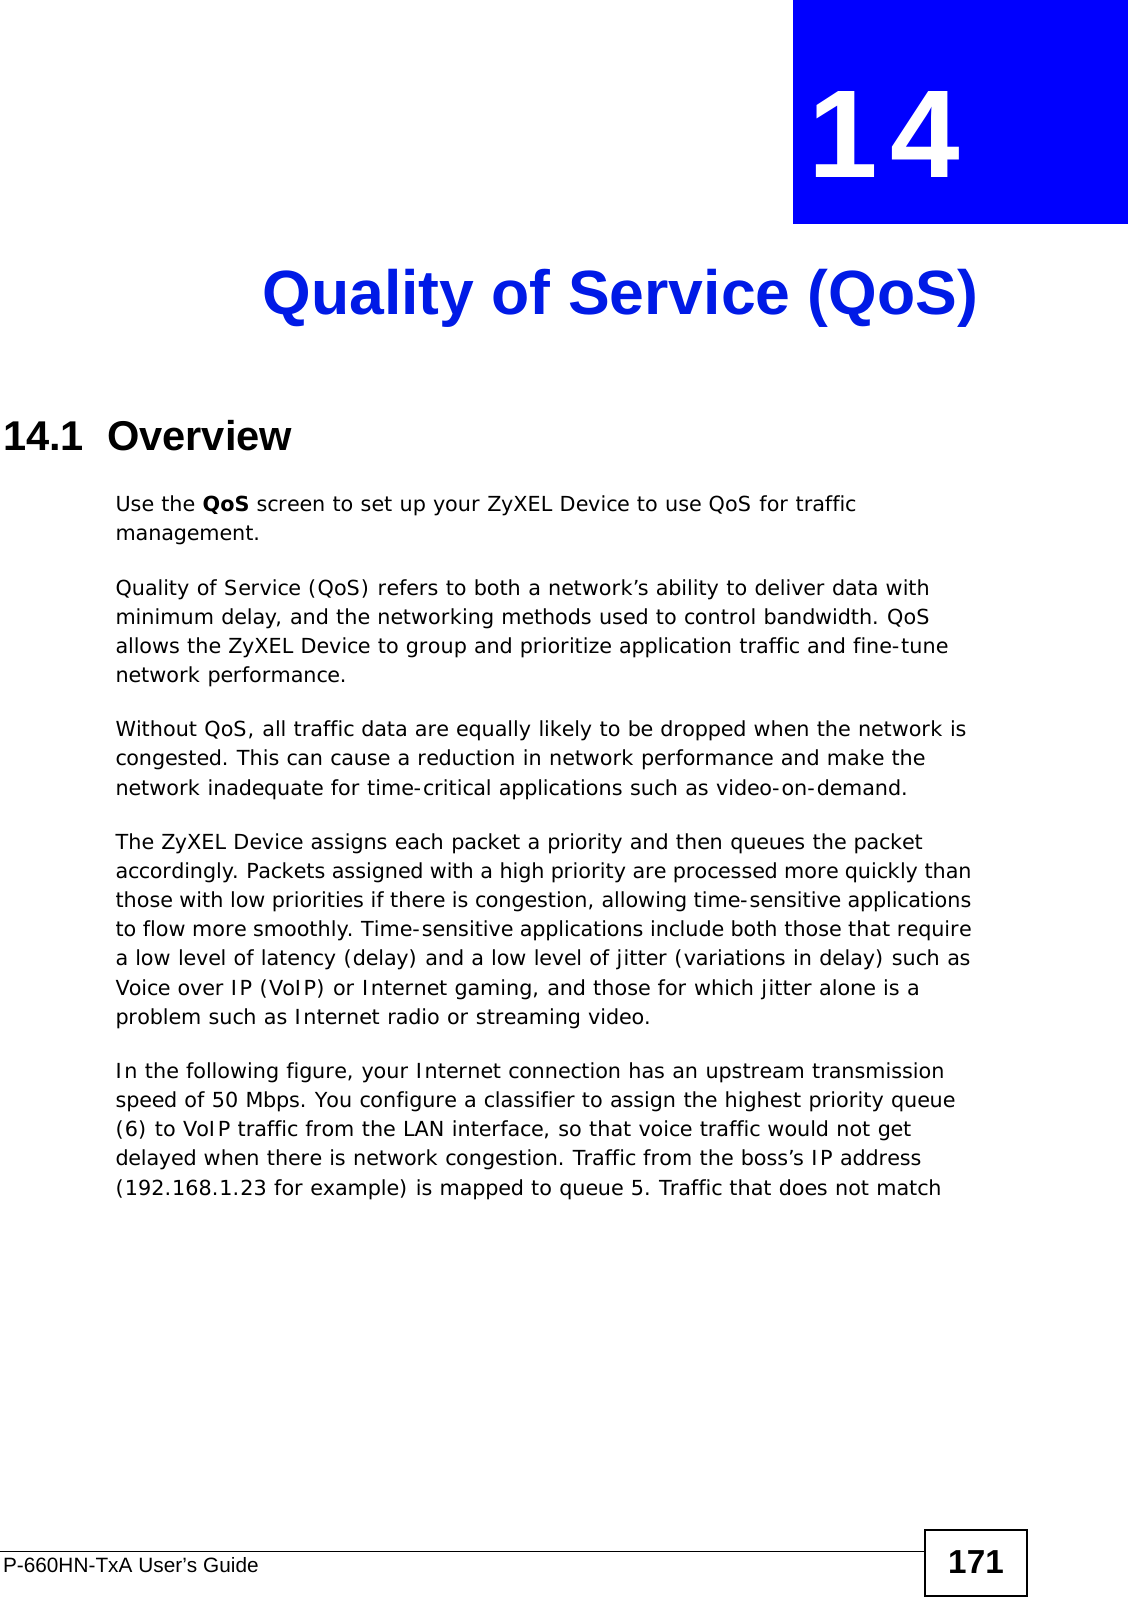 P-660HN-TxA User’s Guide 171CHAPTER  14 Quality of Service (QoS)14.1  OverviewUse the QoS screen to set up your ZyXEL Device to use QoS for traffic management. Quality of Service (QoS) refers to both a network’s ability to deliver data with minimum delay, and the networking methods used to control bandwidth. QoS allows the ZyXEL Device to group and prioritize application traffic and fine-tune network performance. Without QoS, all traffic data are equally likely to be dropped when the network is congested. This can cause a reduction in network performance and make the network inadequate for time-critical applications such as video-on-demand.The ZyXEL Device assigns each packet a priority and then queues the packet accordingly. Packets assigned with a high priority are processed more quickly than those with low priorities if there is congestion, allowing time-sensitive applications to flow more smoothly. Time-sensitive applications include both those that require a low level of latency (delay) and a low level of jitter (variations in delay) such as Voice over IP (VoIP) or Internet gaming, and those for which jitter alone is a problem such as Internet radio or streaming video.In the following figure, your Internet connection has an upstream transmission speed of 50 Mbps. You configure a classifier to assign the highest priority queue (6) to VoIP traffic from the LAN interface, so that voice traffic would not get delayed when there is network congestion. Traffic from the boss’s IP address (192.168.1.23 for example) is mapped to queue 5. Traffic that does not match 